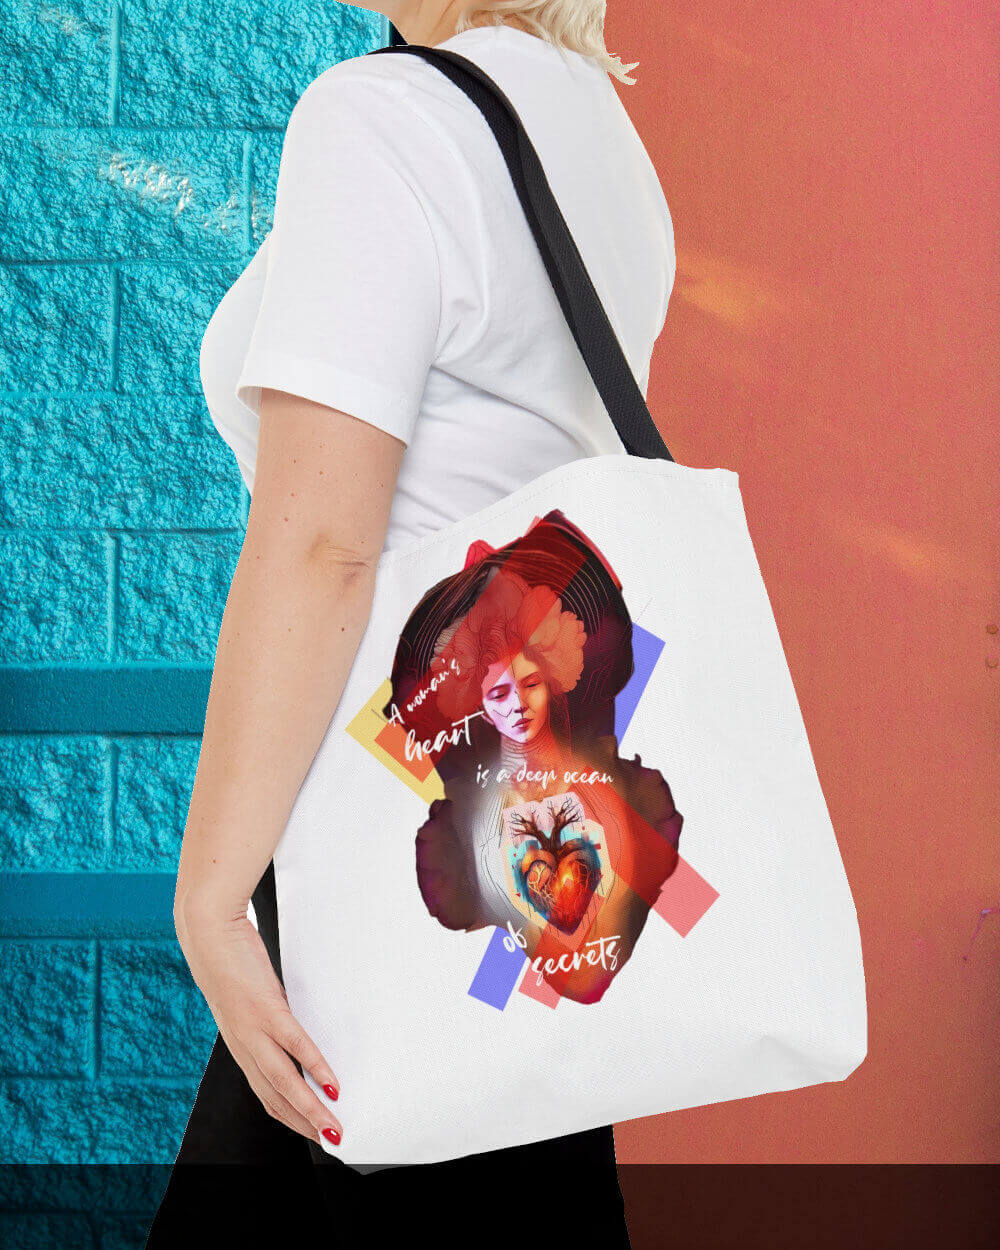 A Woman's Heart white tote bag on Etsy